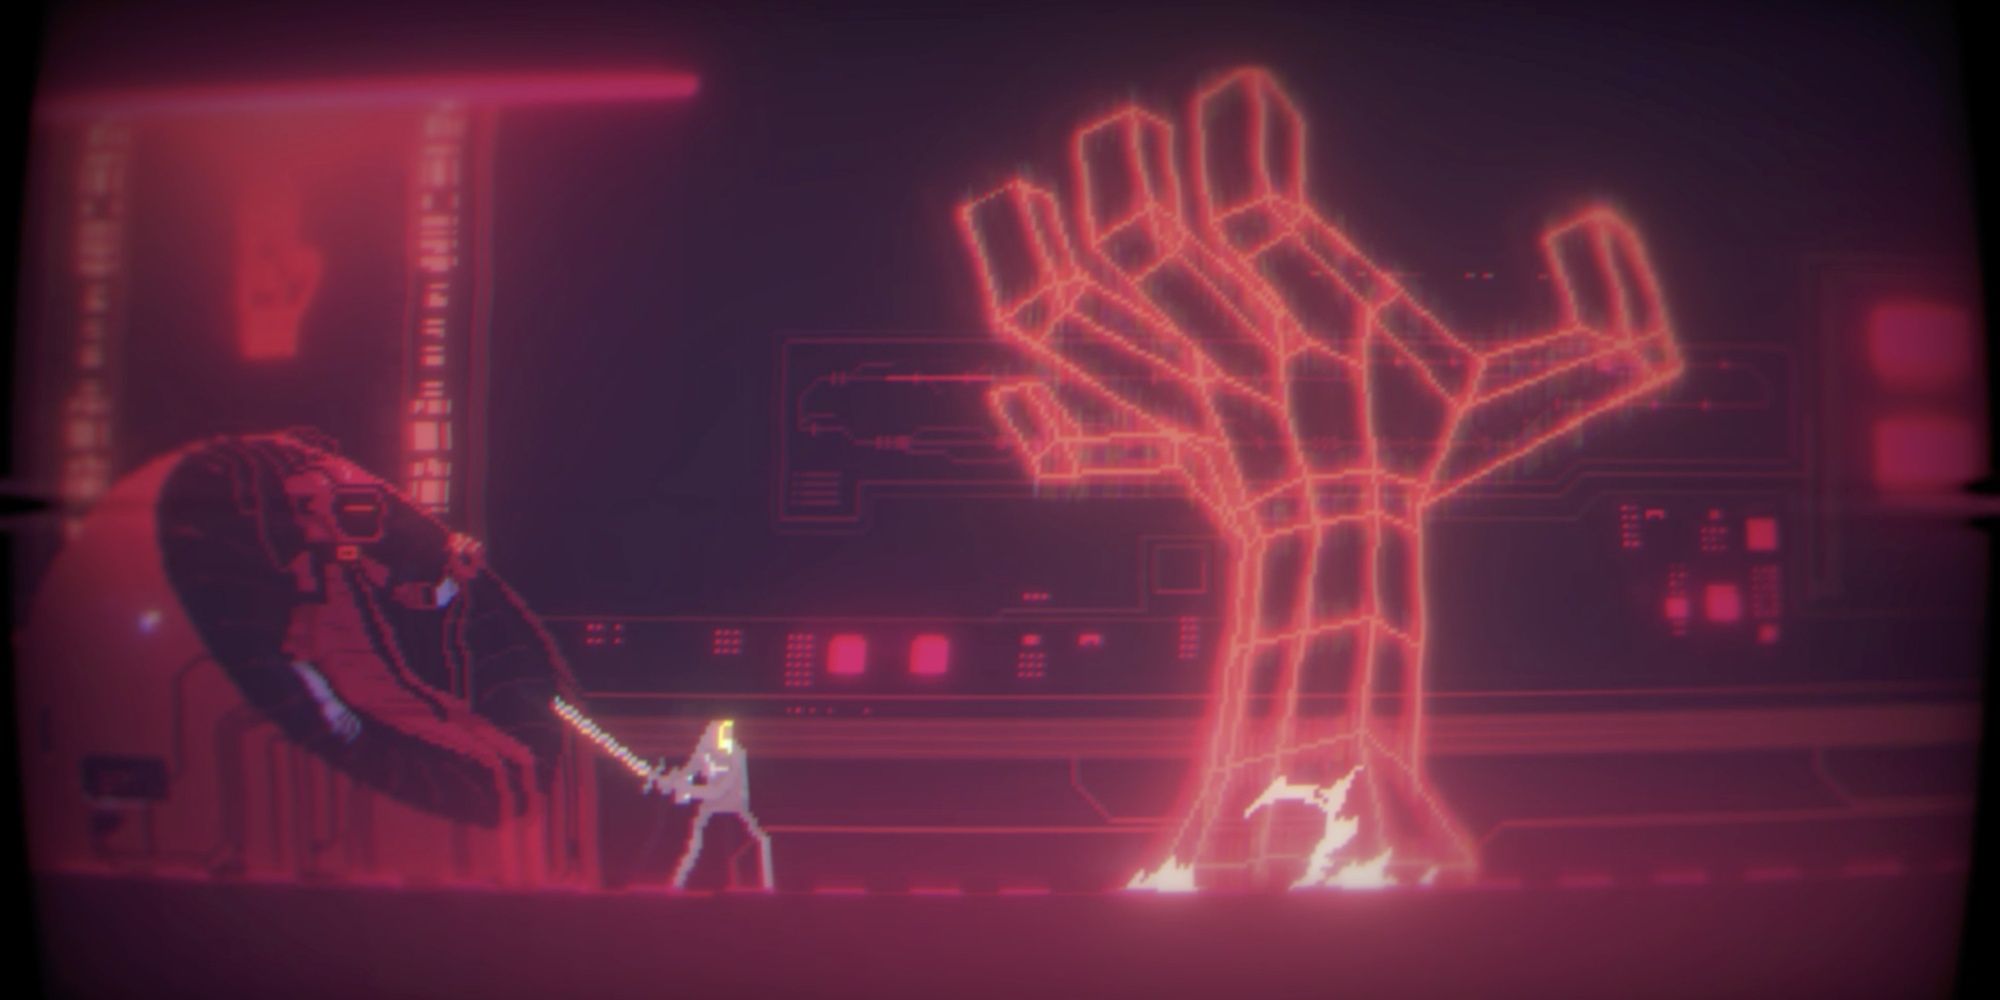 In a red digitized retro room, the main character in Narita Boy swings a sword at a digitized giant 3D hand.